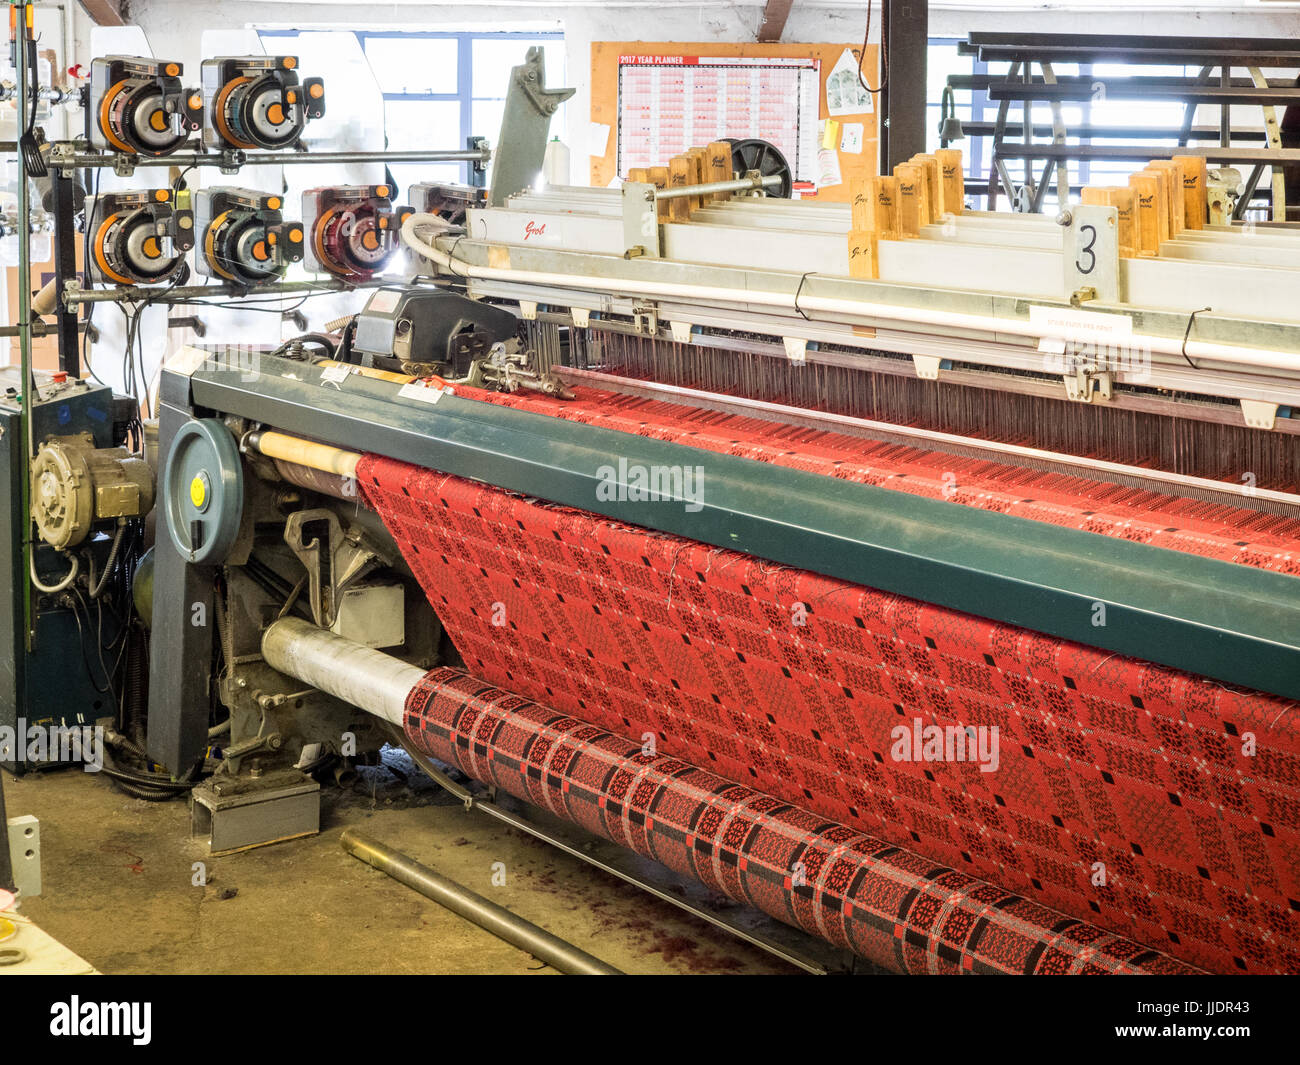 Fabric being woven on a loom at the Melyn Tregwynt Mill in Pembrokeshire, Wales, UK Stock Photo